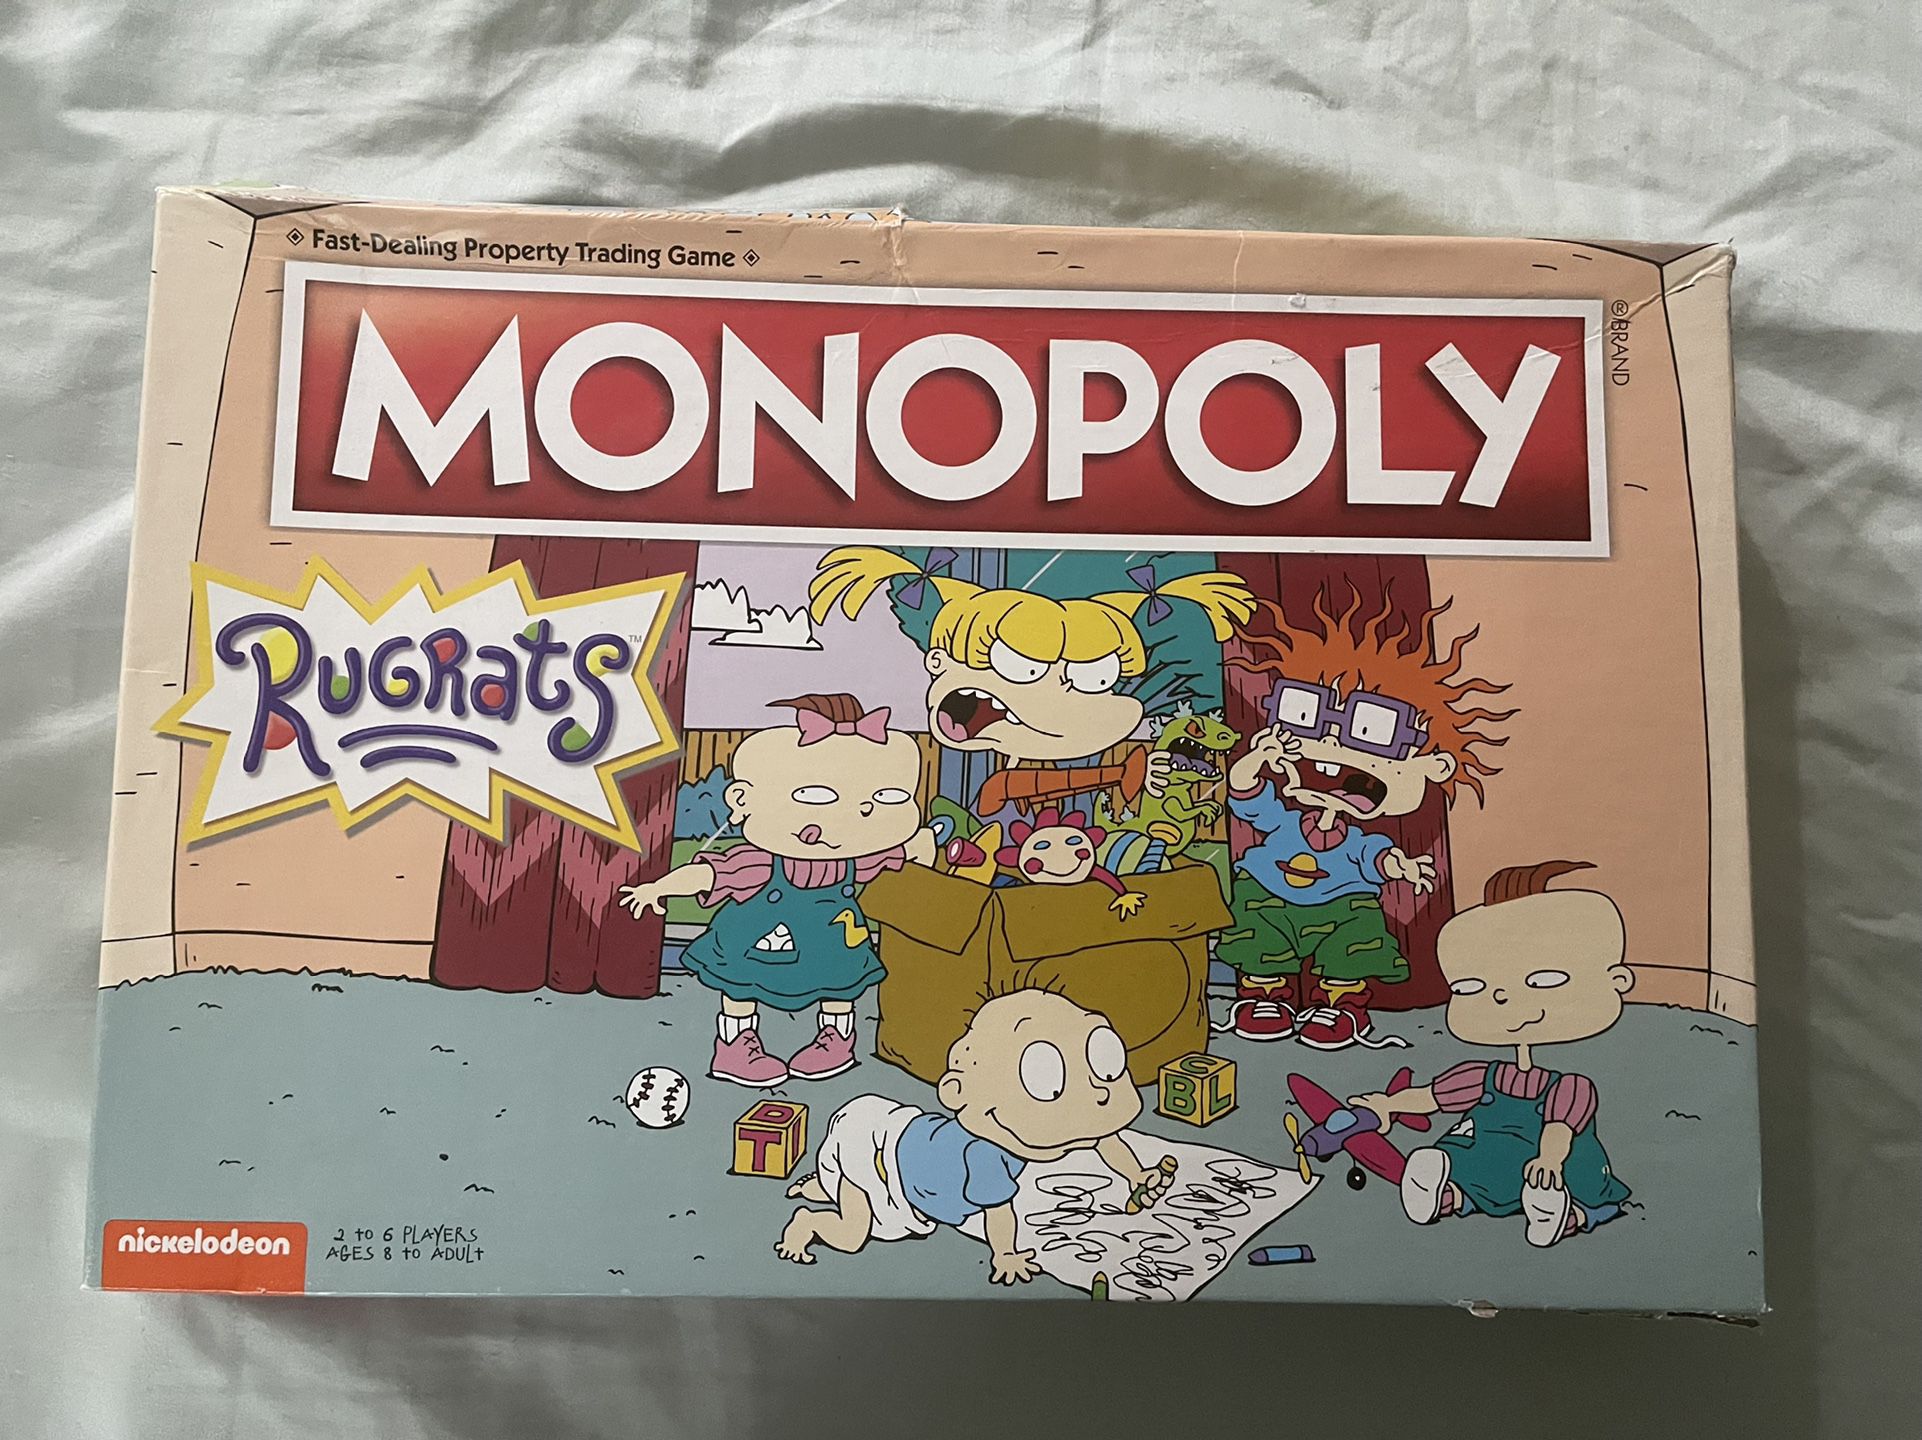 Rugrats Monopoly 2018 Board Game  USAopoly  Nickelodeon Brand New Not Sealed Box In Not Mint Shape 